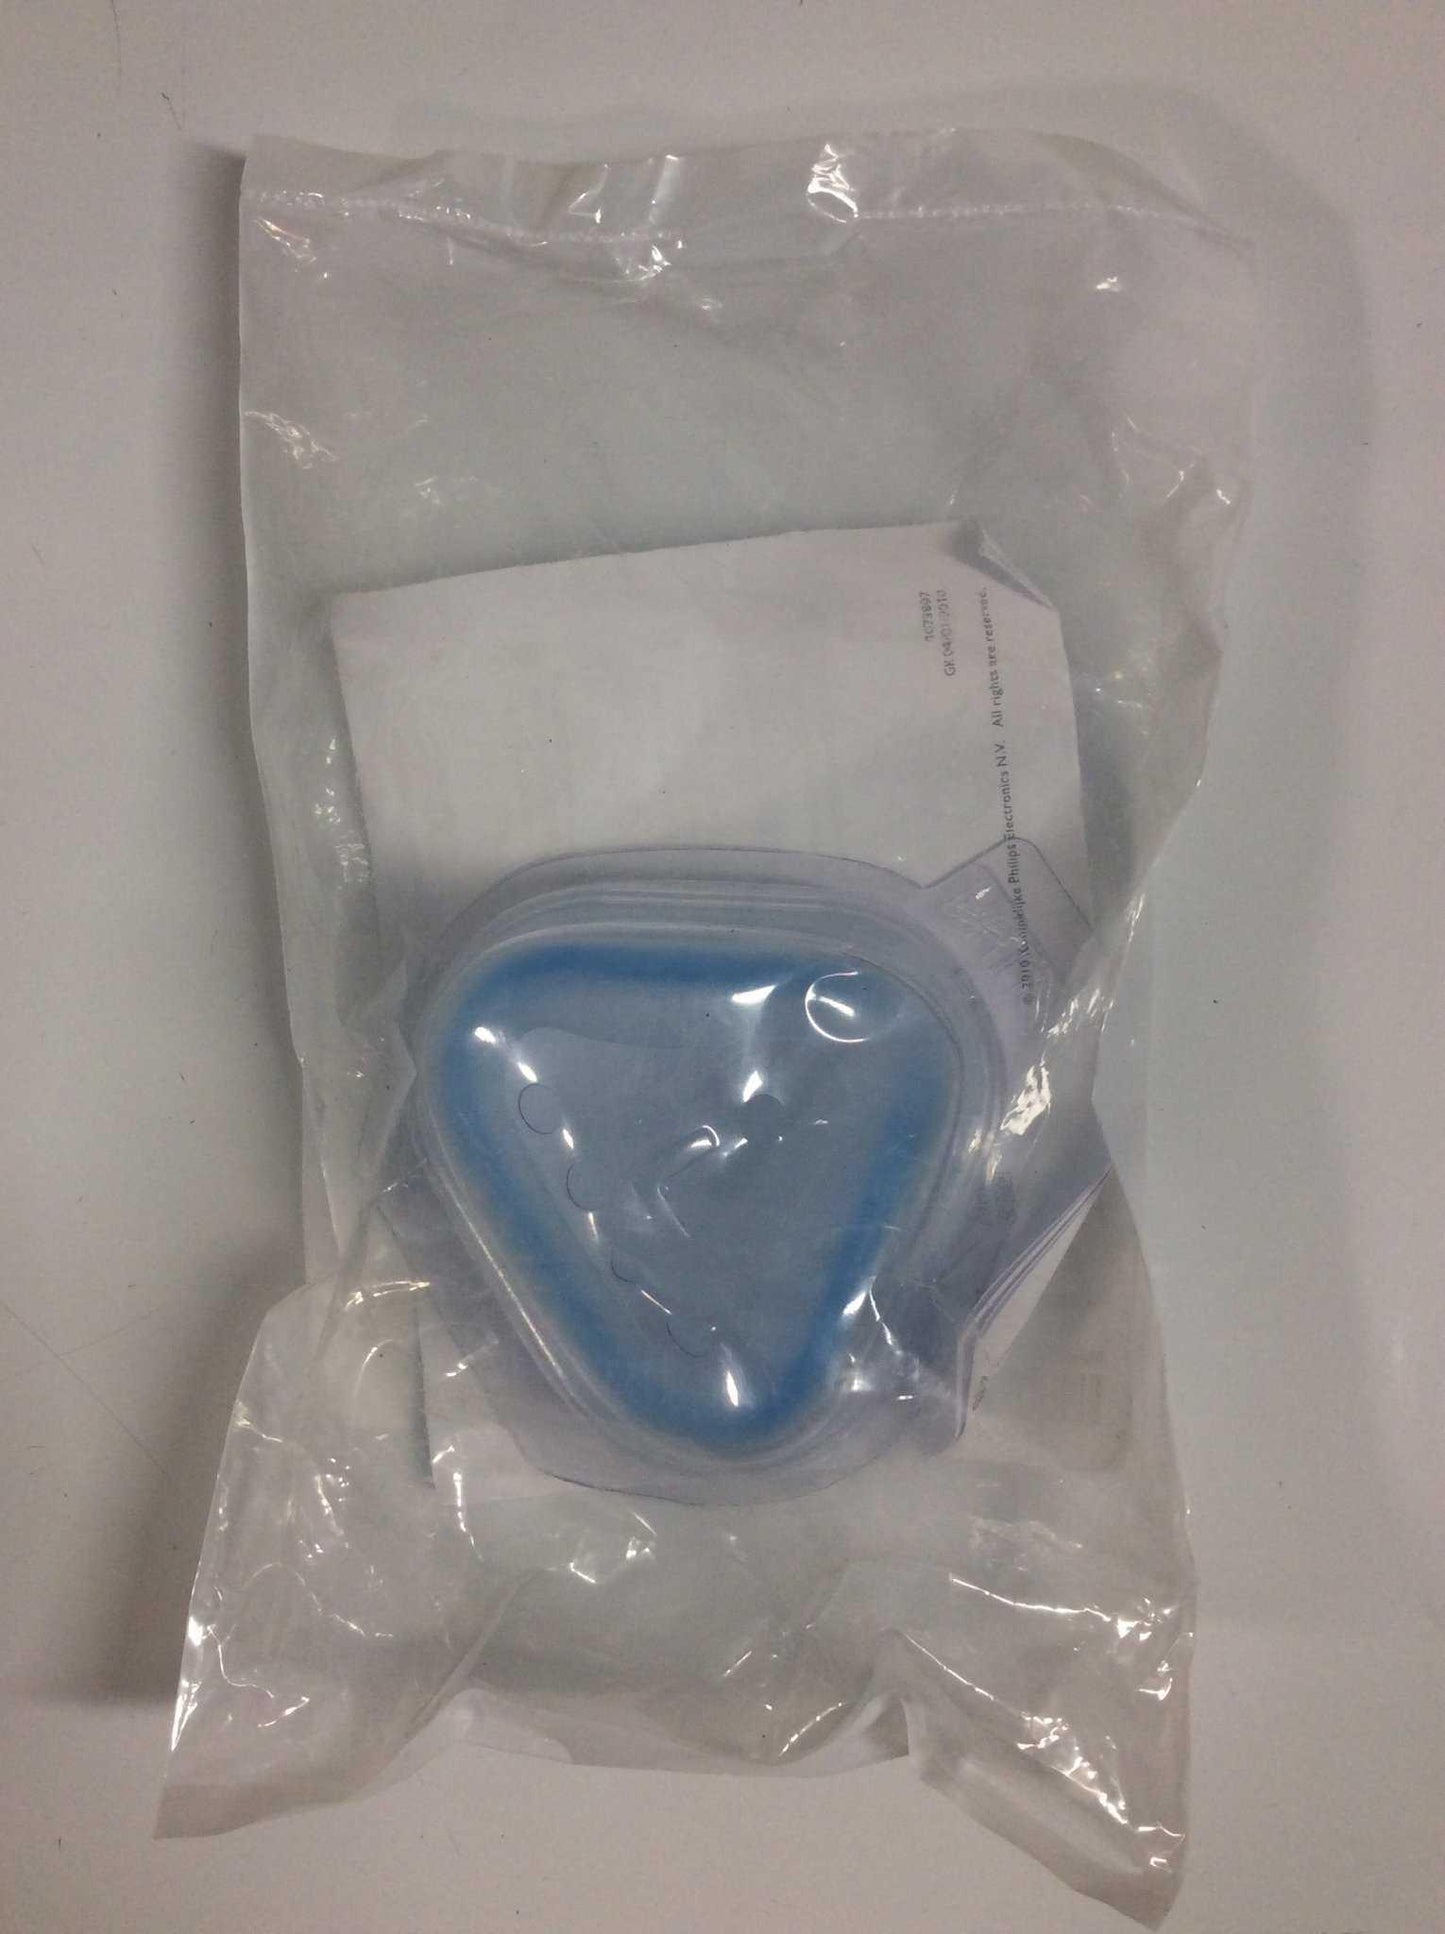 NEW Philips Respironics Large Comfortgel Blue Flap and Gel Cushion 1070105 - MBR Medicals